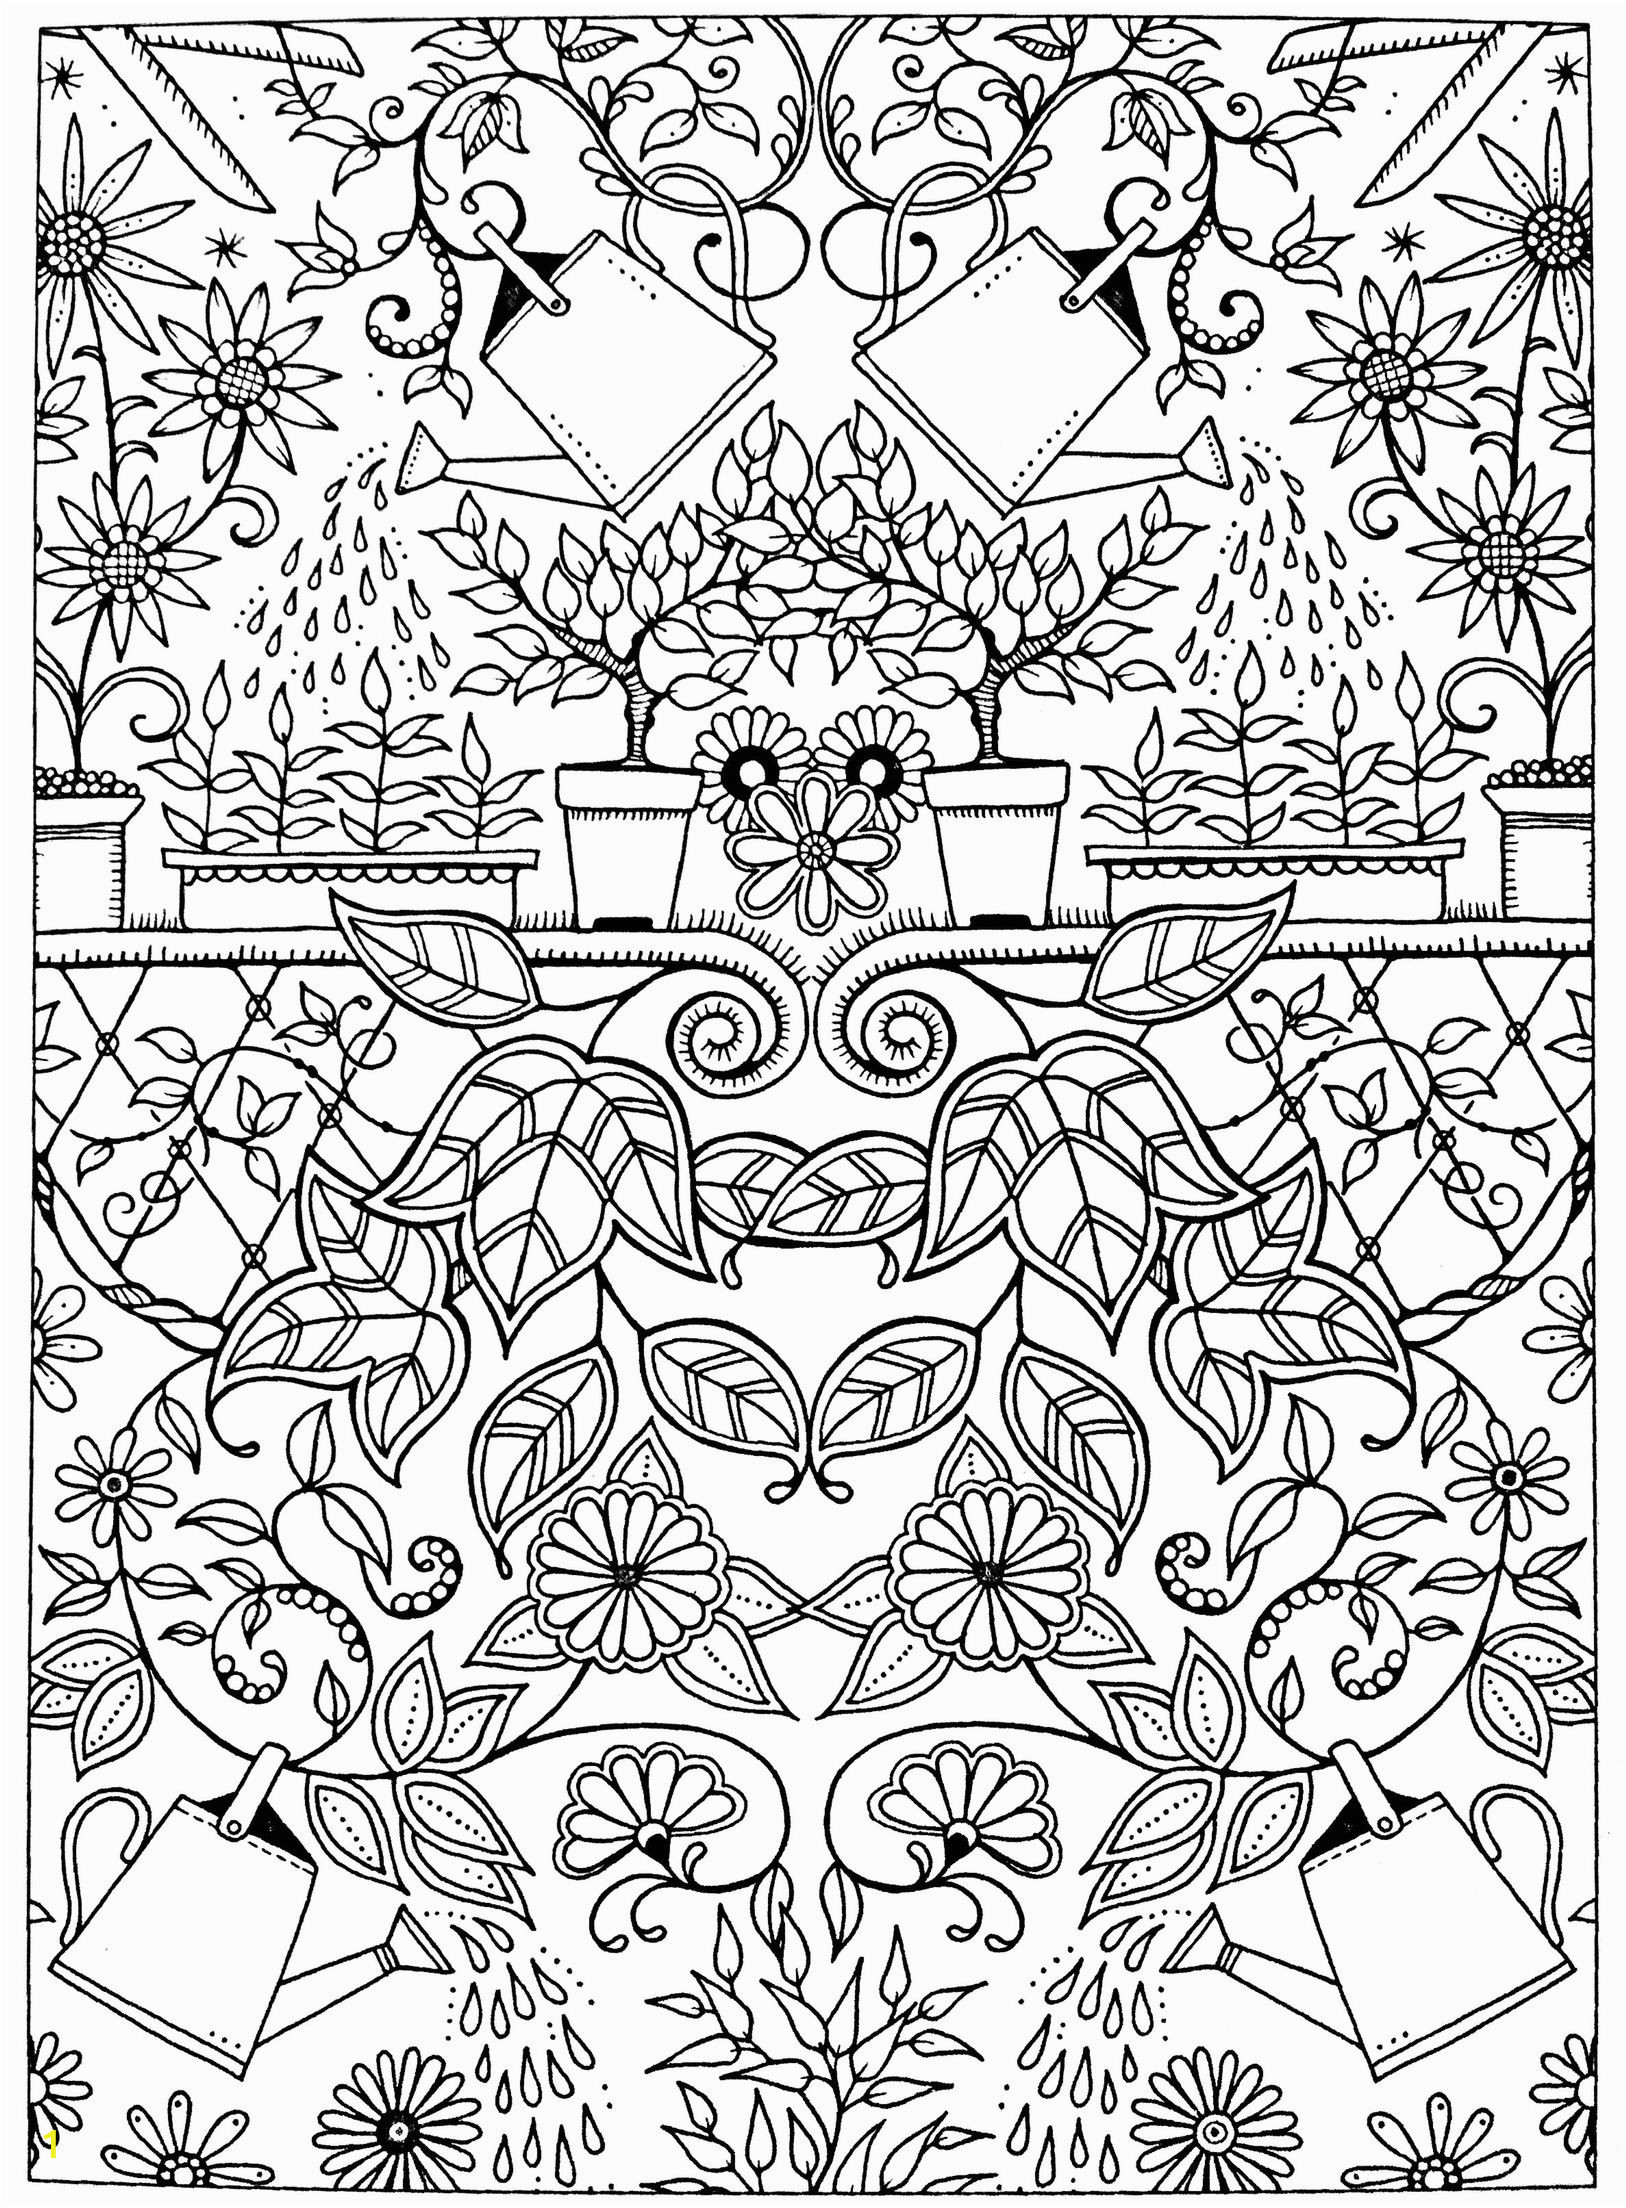 Inspirational Coloring Pages Adult Coloring Pages Jangle Charm Free Adult Coloring Page Secret Garden